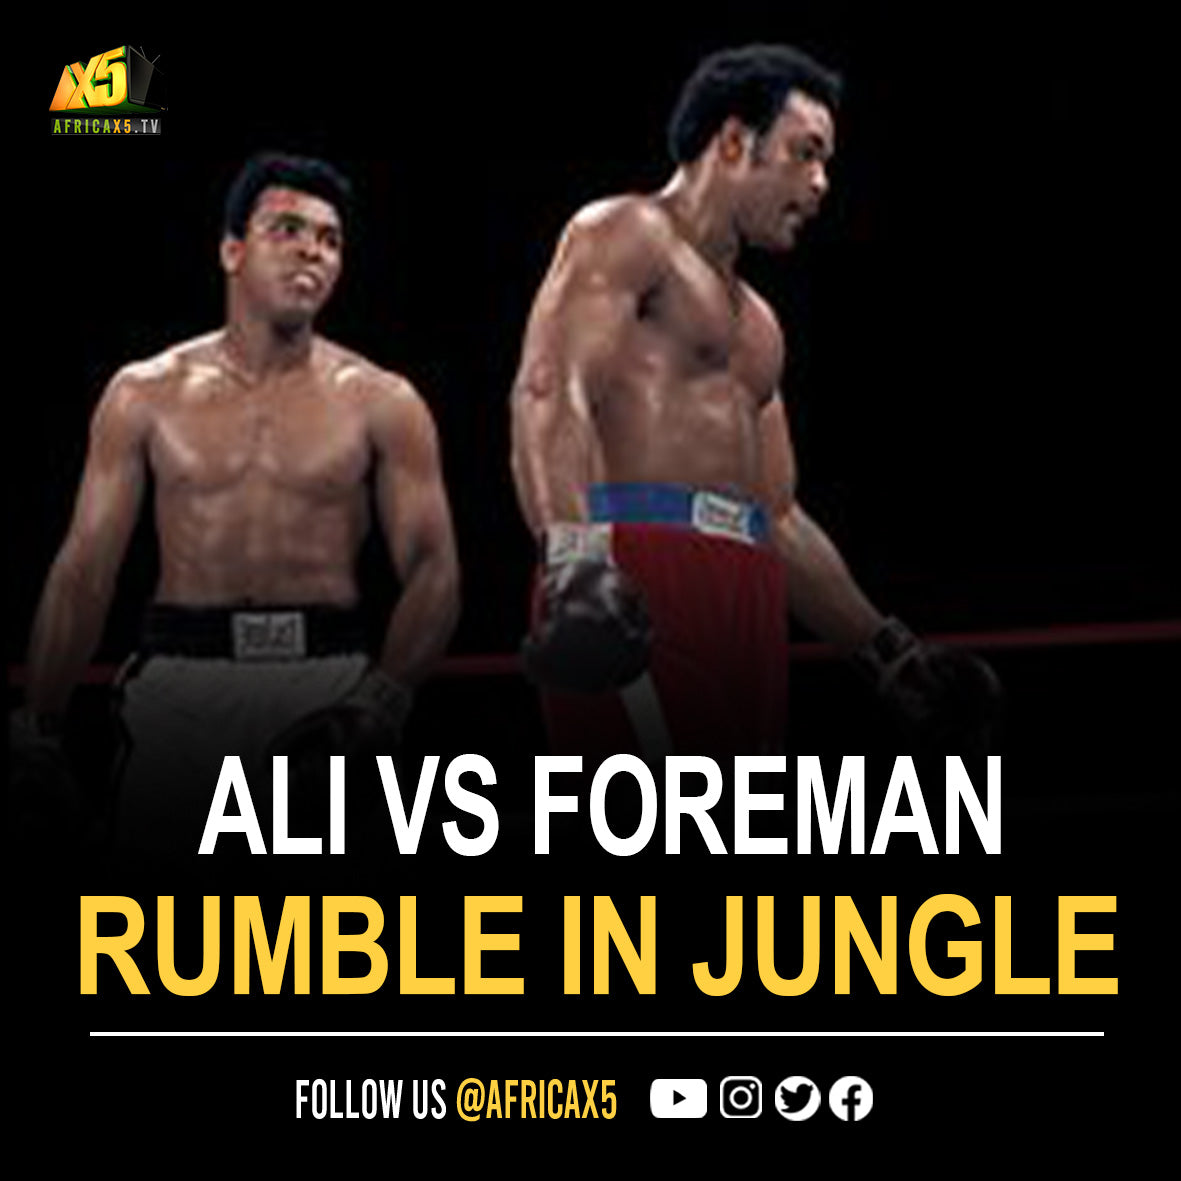 George Foreman vs. Muhammad Ali, billed as The Rumble in the Jungle in DRC